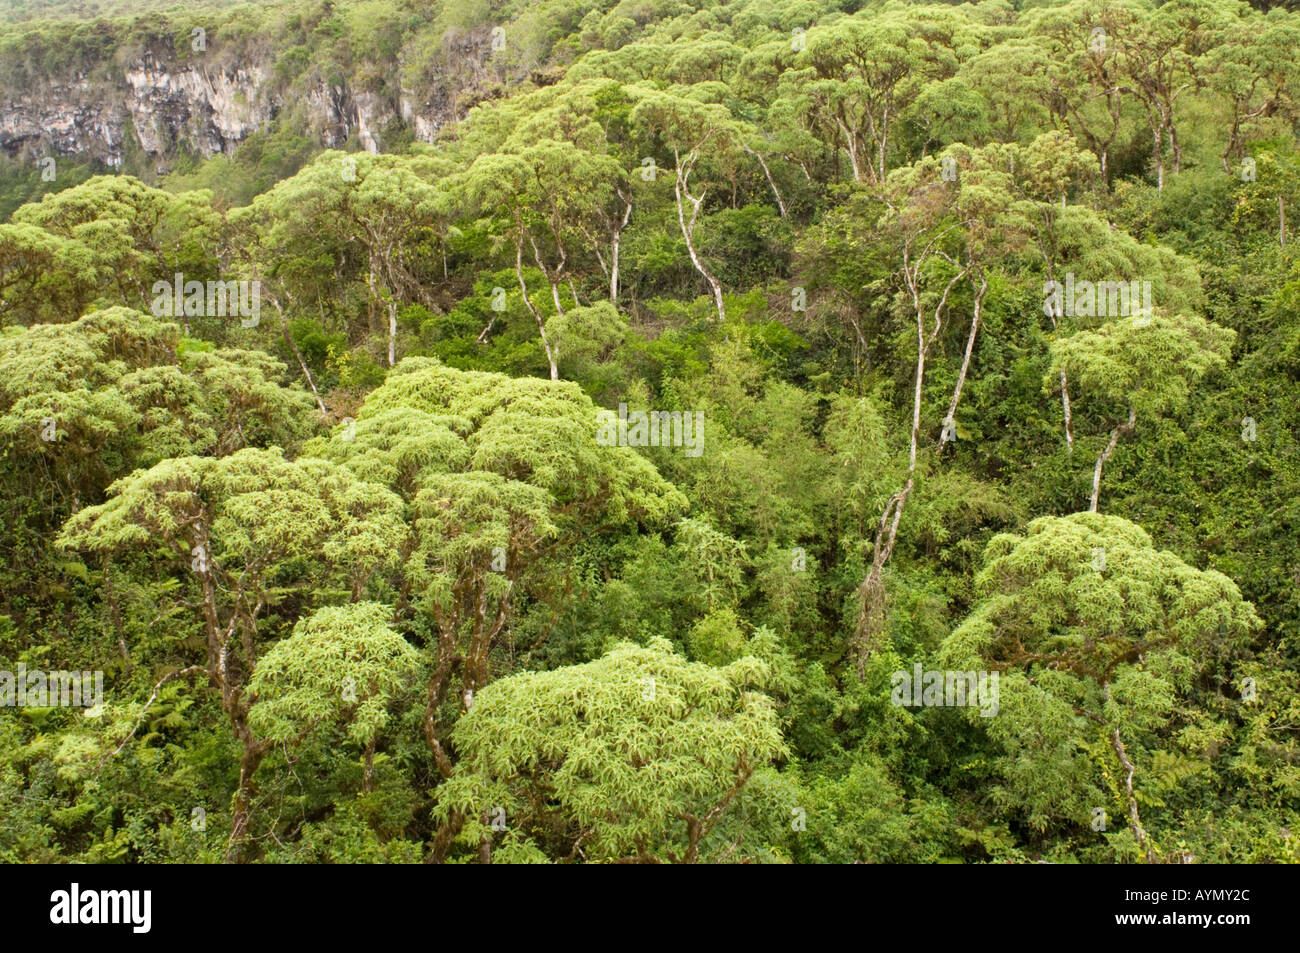 The scalesia zone with Daisy tree (Scalesia pedunculata) Los Gemelos pit crater Santa Cruz highlands Galapagos Pacific Ocean Stock Photo